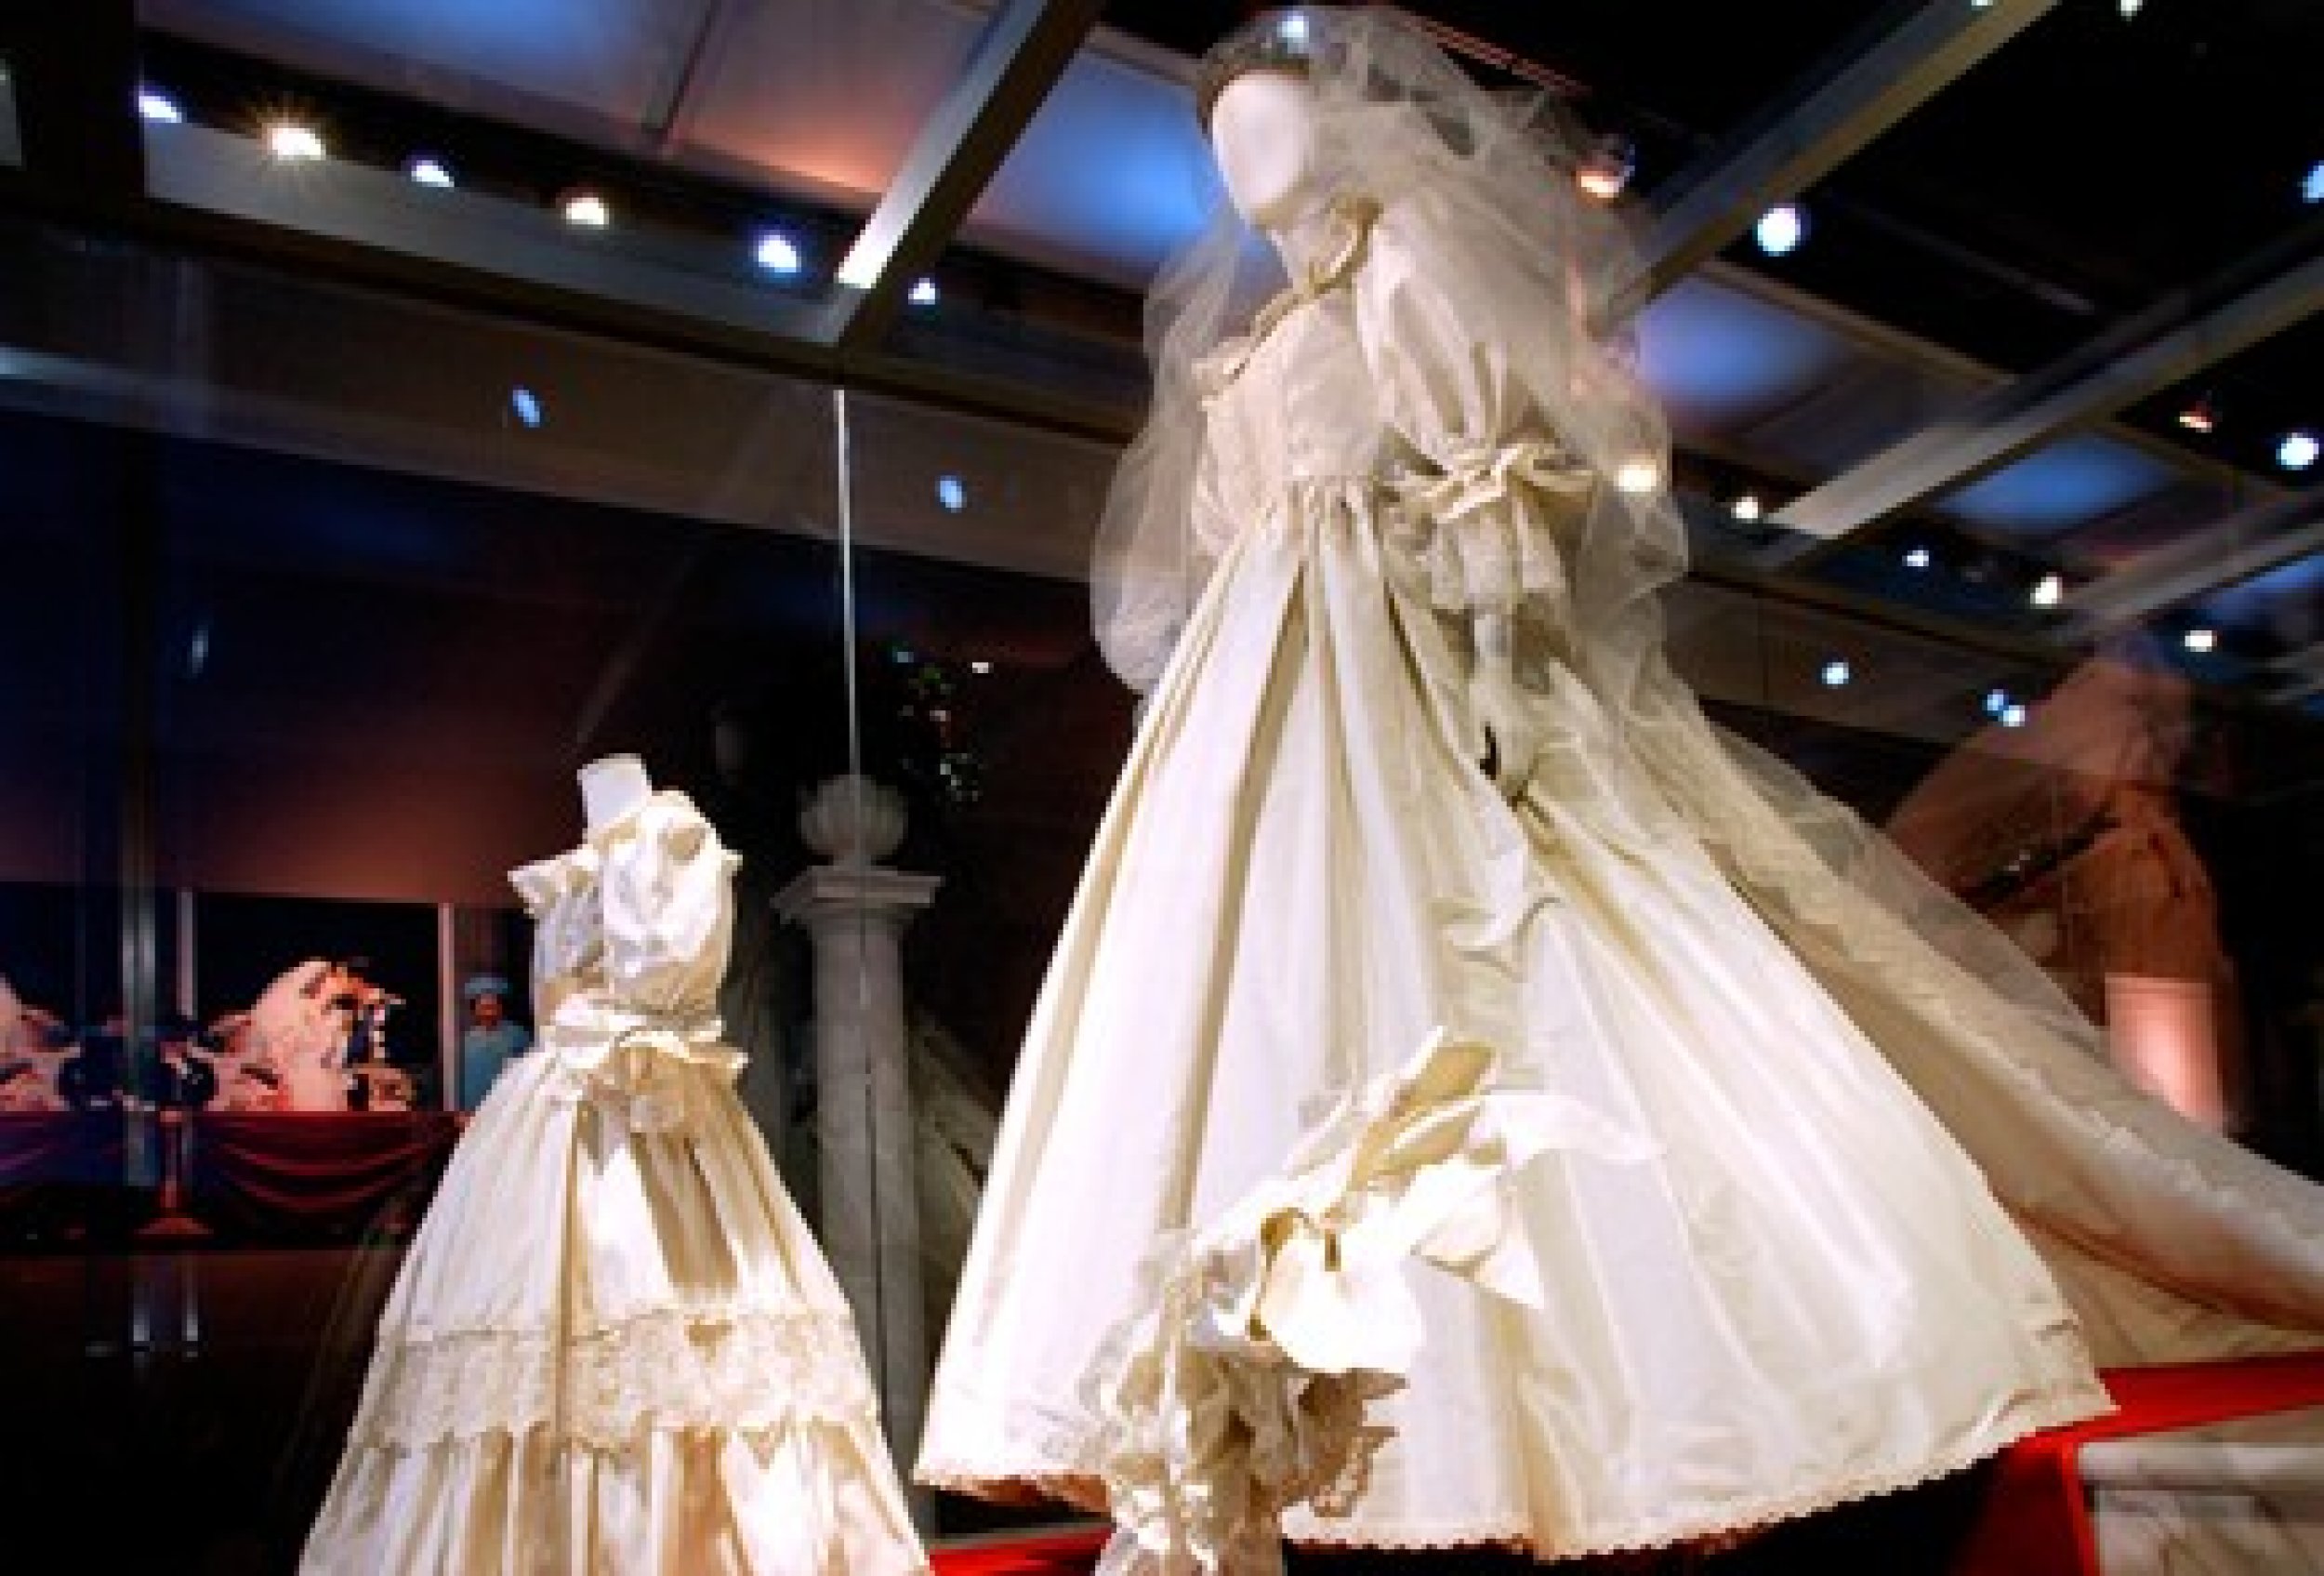 Nine Mall of America Galleries Chronicles the Life of Princess Diana